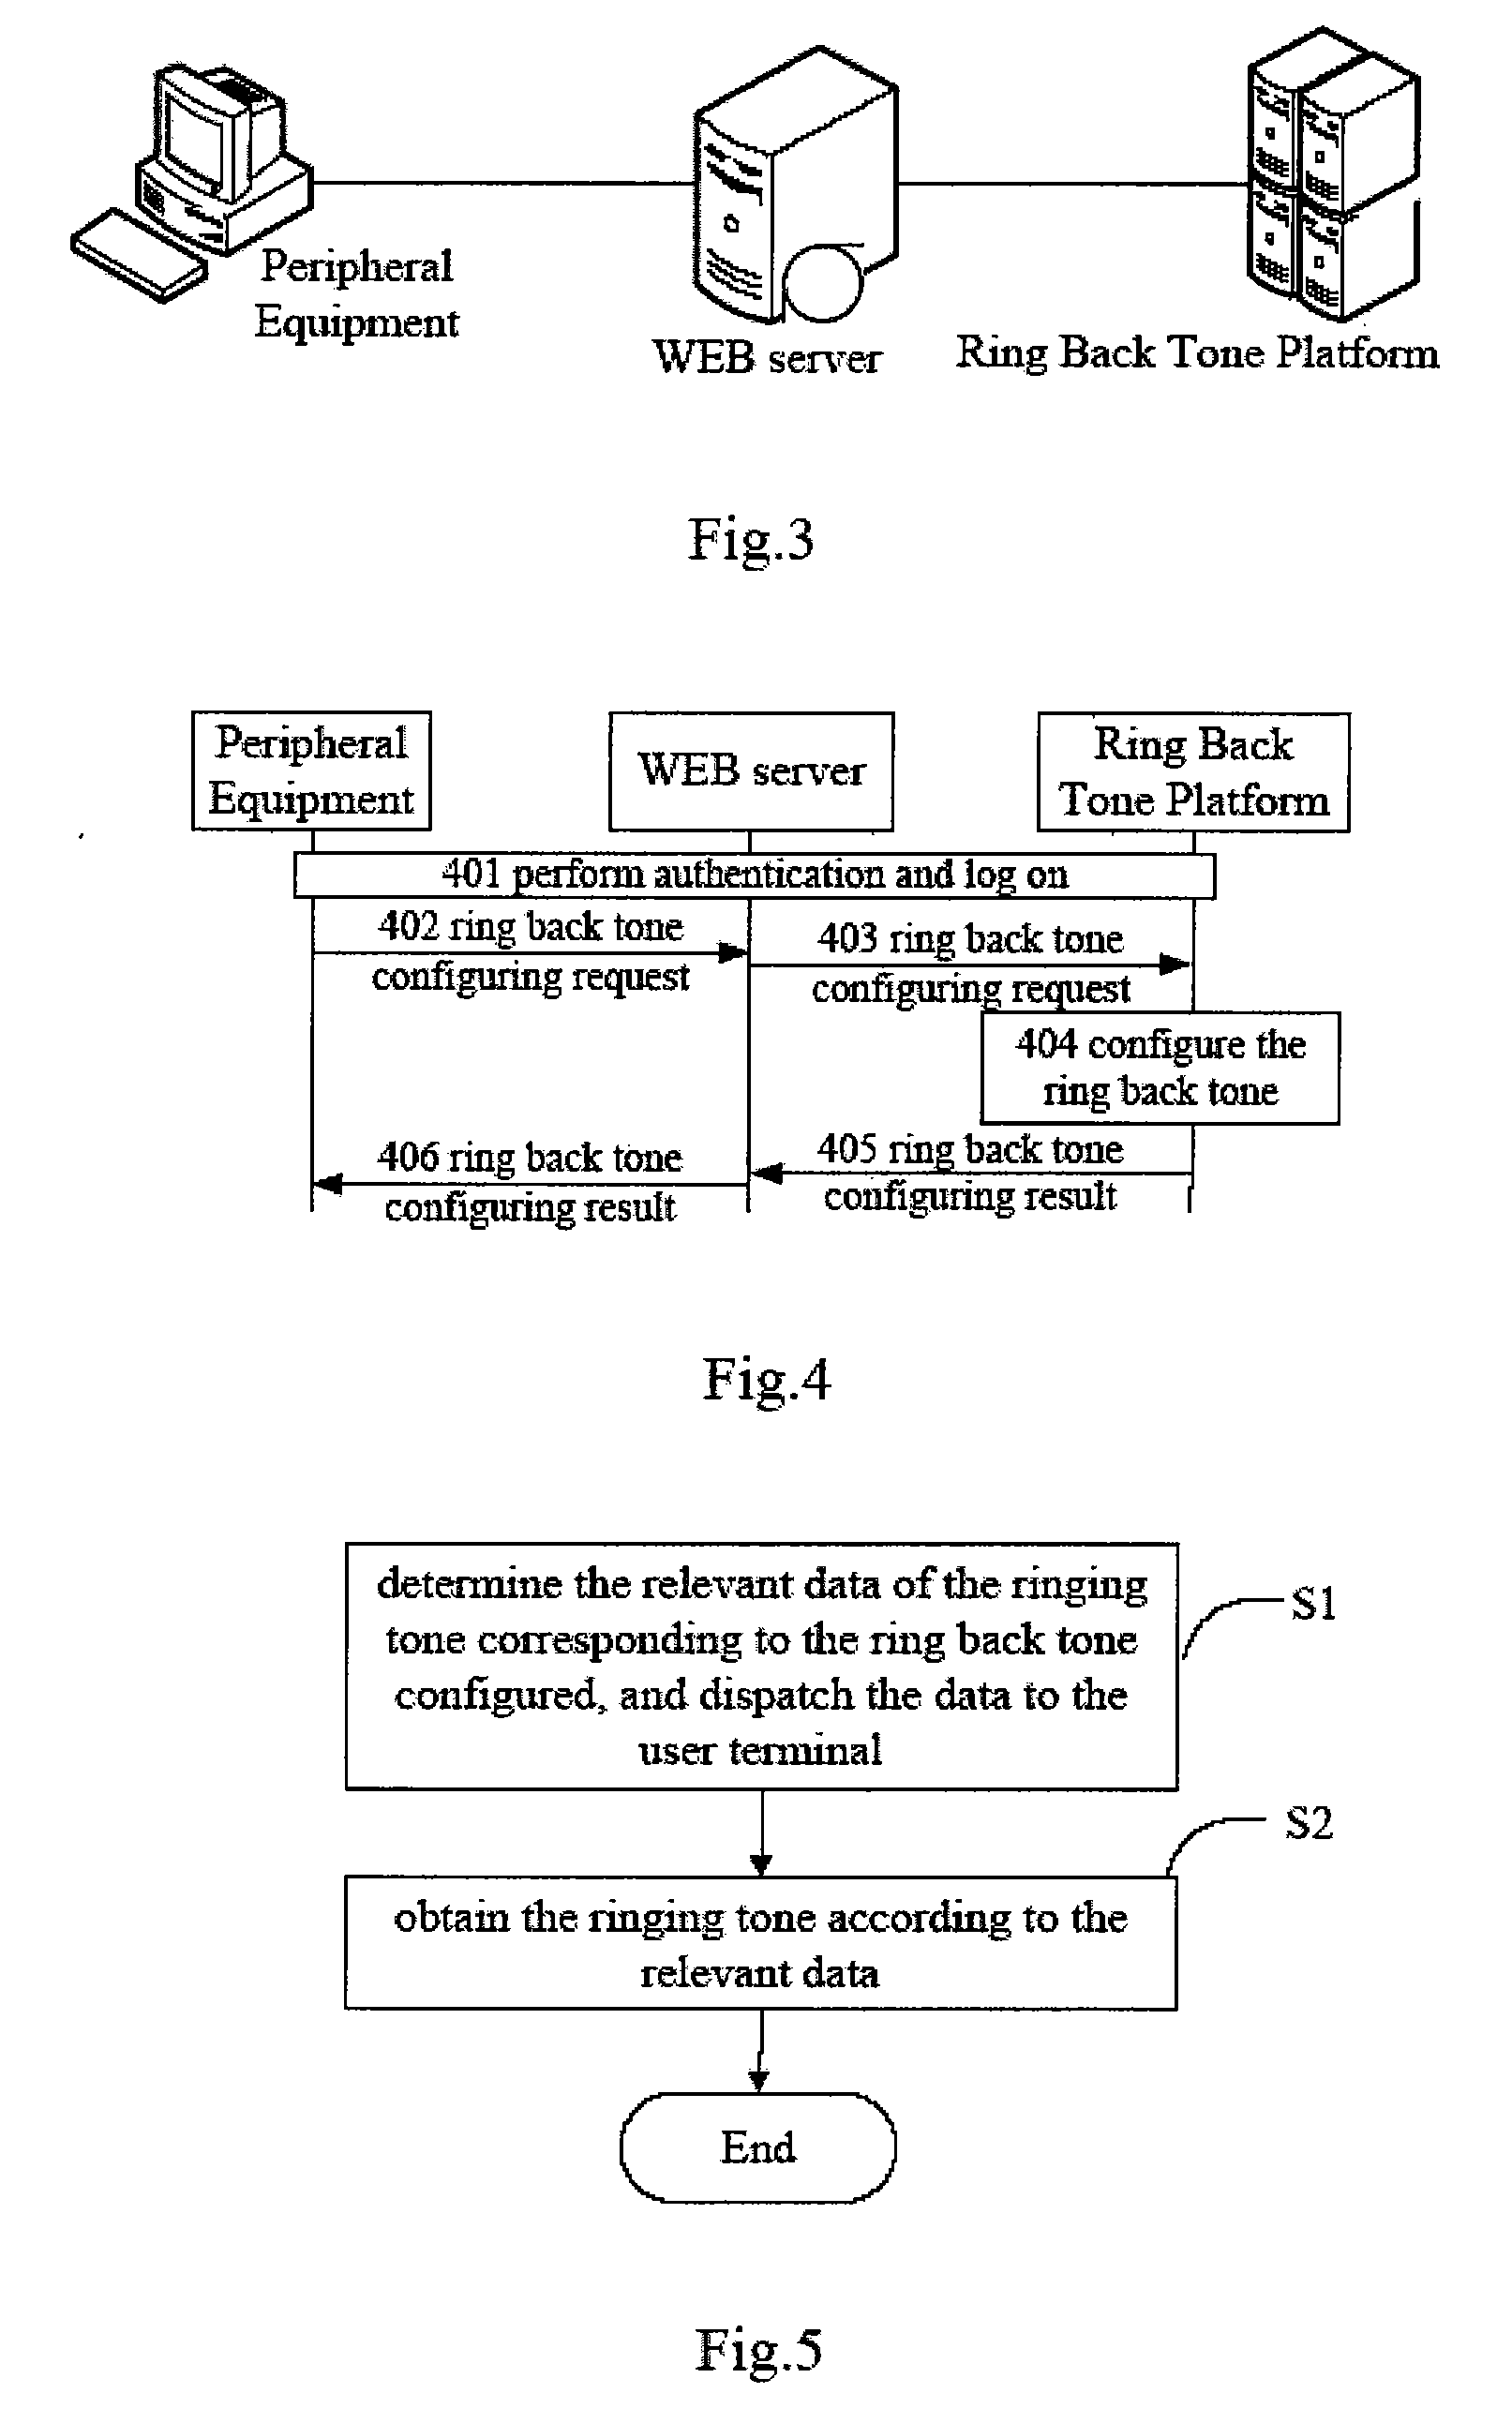 Method and system for implementing interconversion between ring back tone and ringing tone